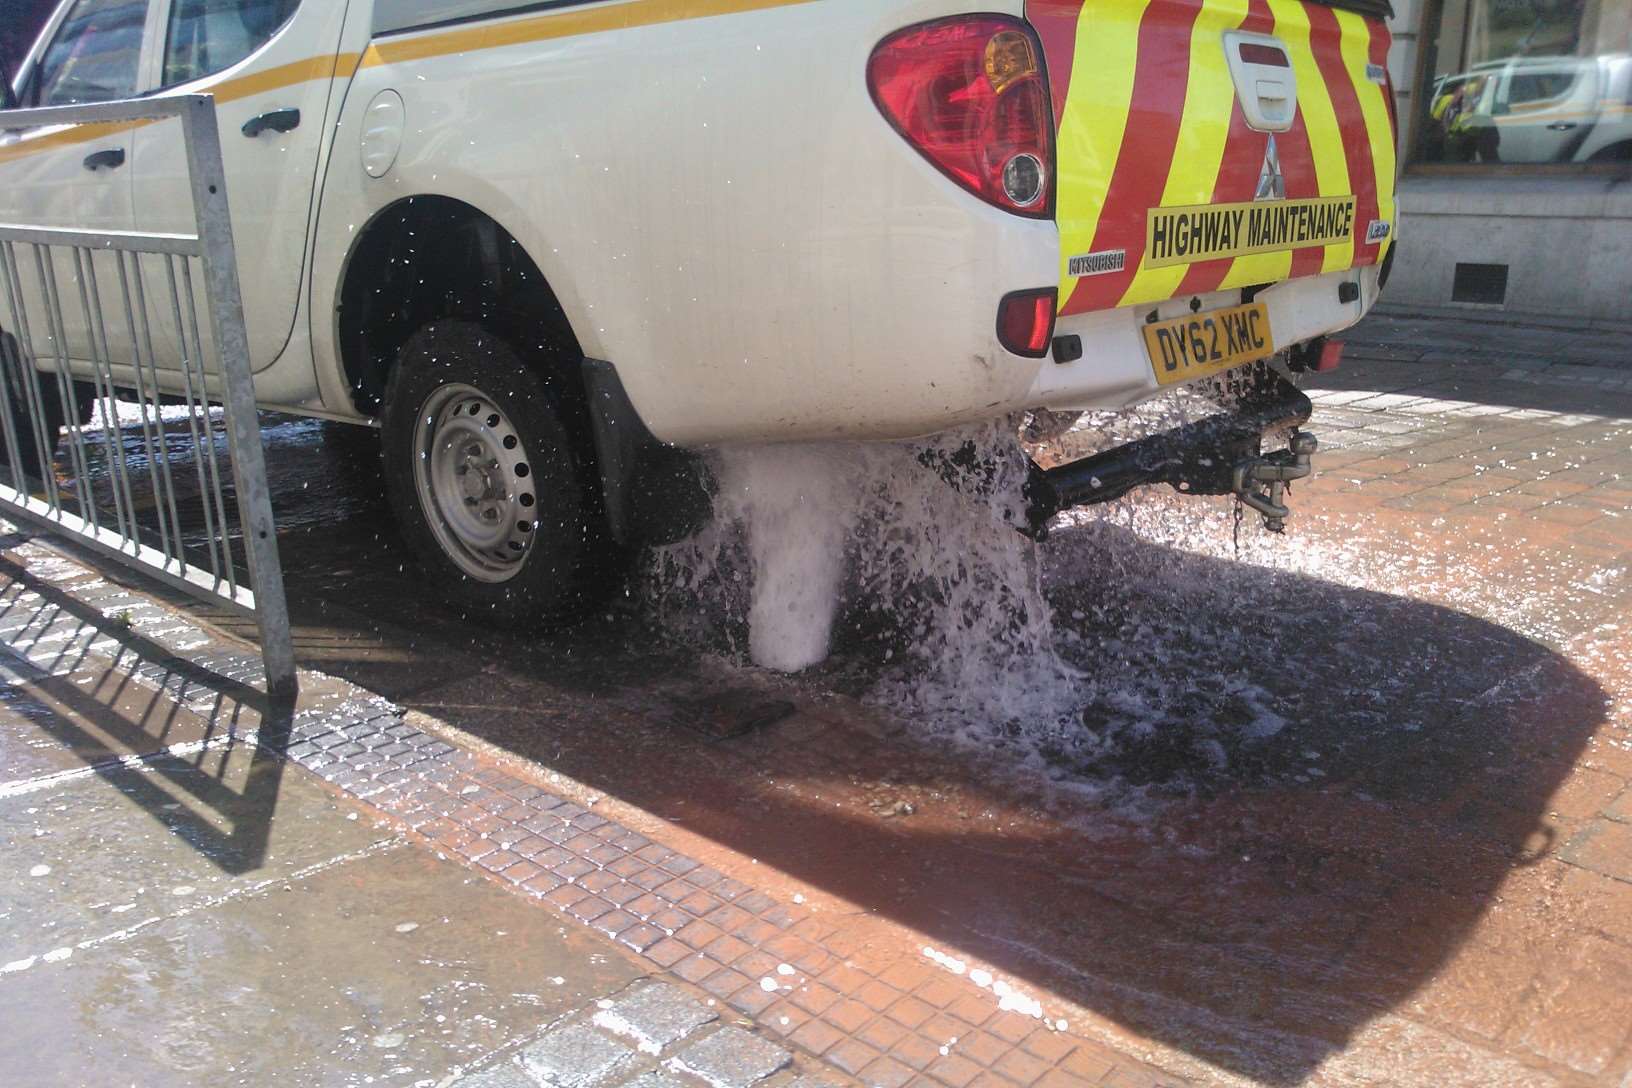 The burst water pipe was caused as work was carried out nearby